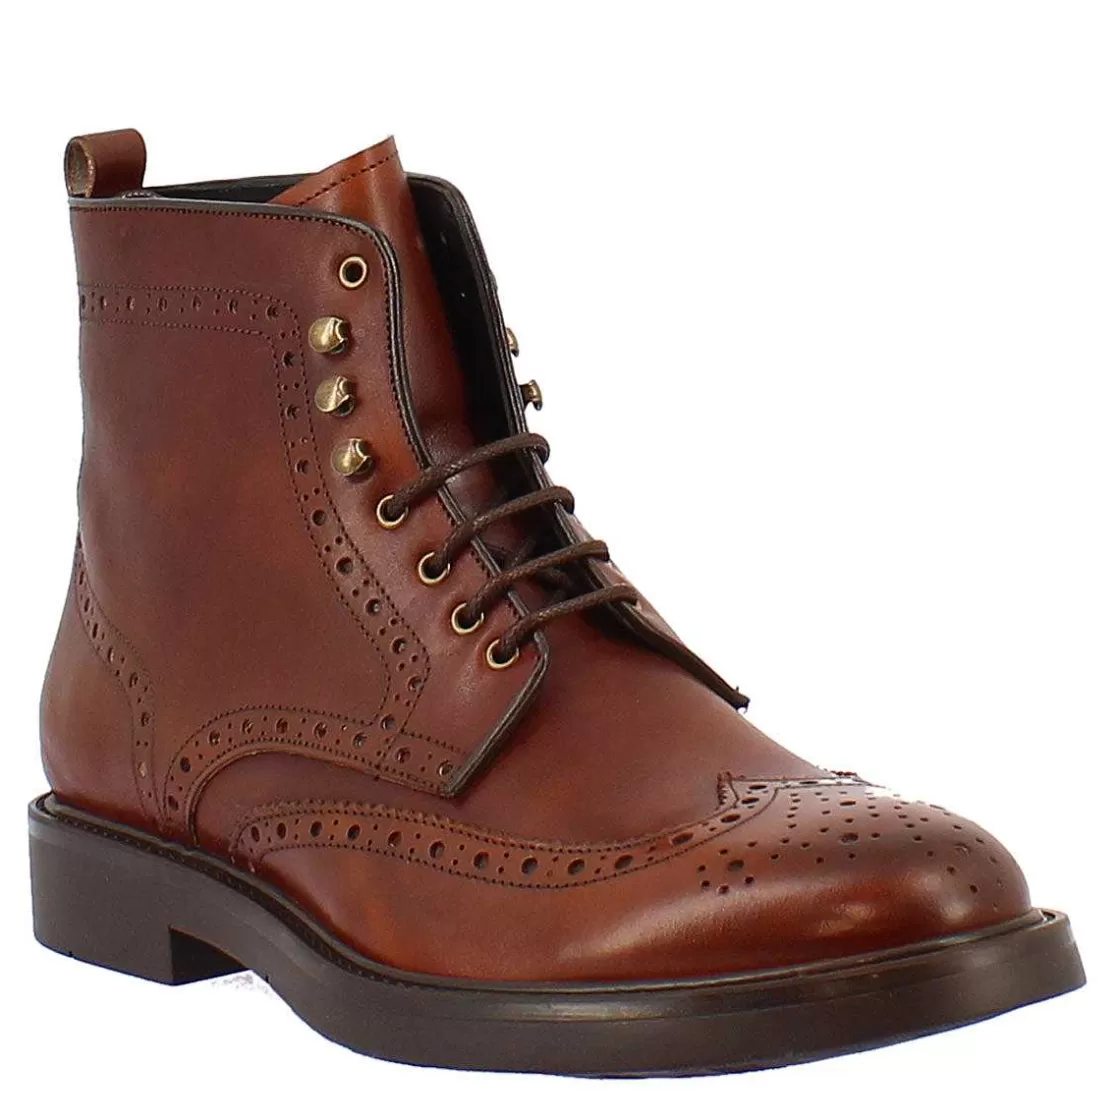 Leonardo Men'S Brogue Derby Ankle Boot In Brown Leather With Rubber Sole Discount